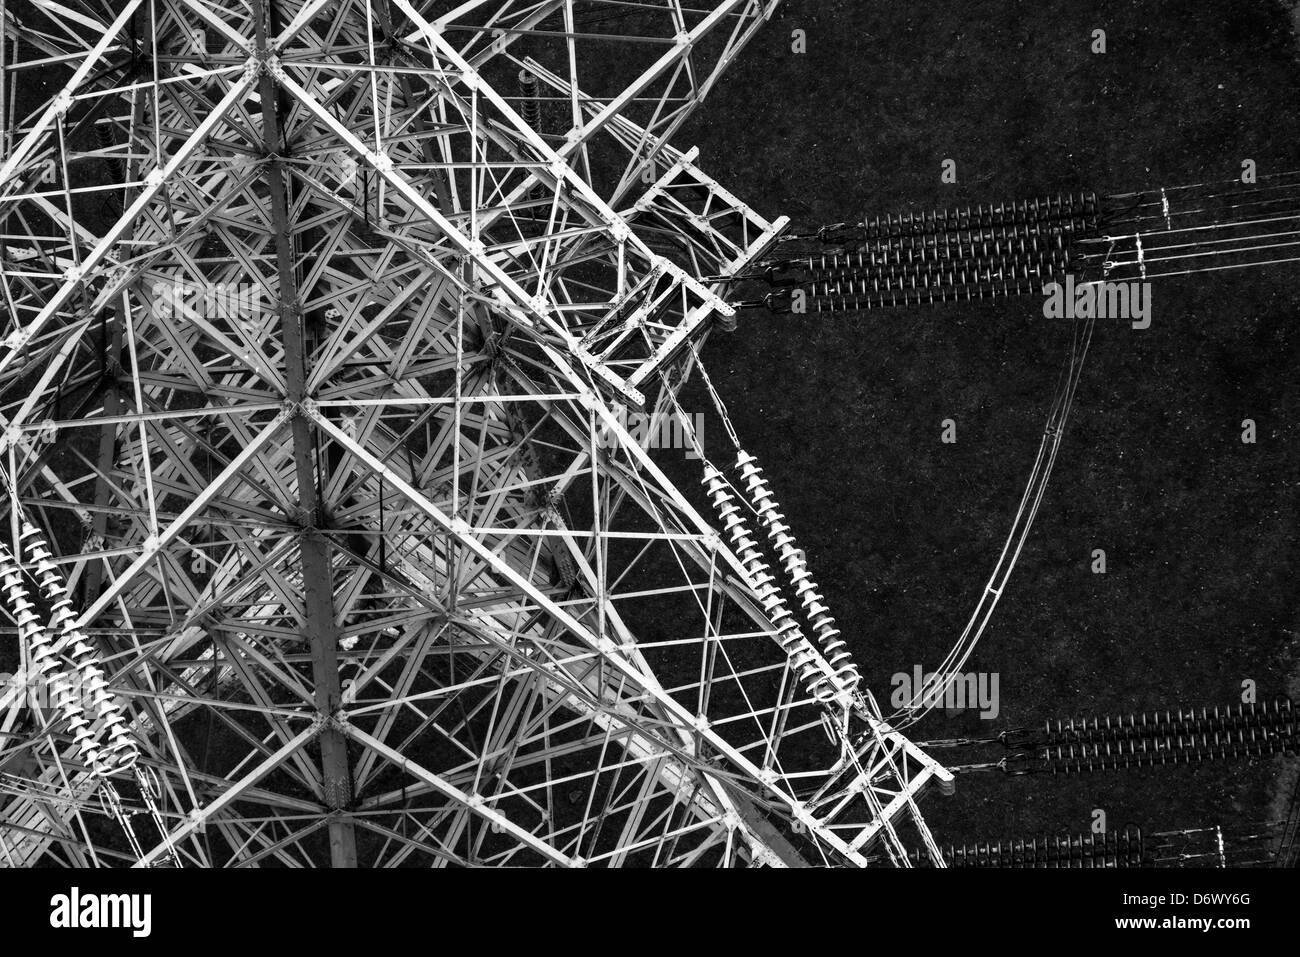 Close up black and white aerial photograph showing details power lines and pylon Stock Photo